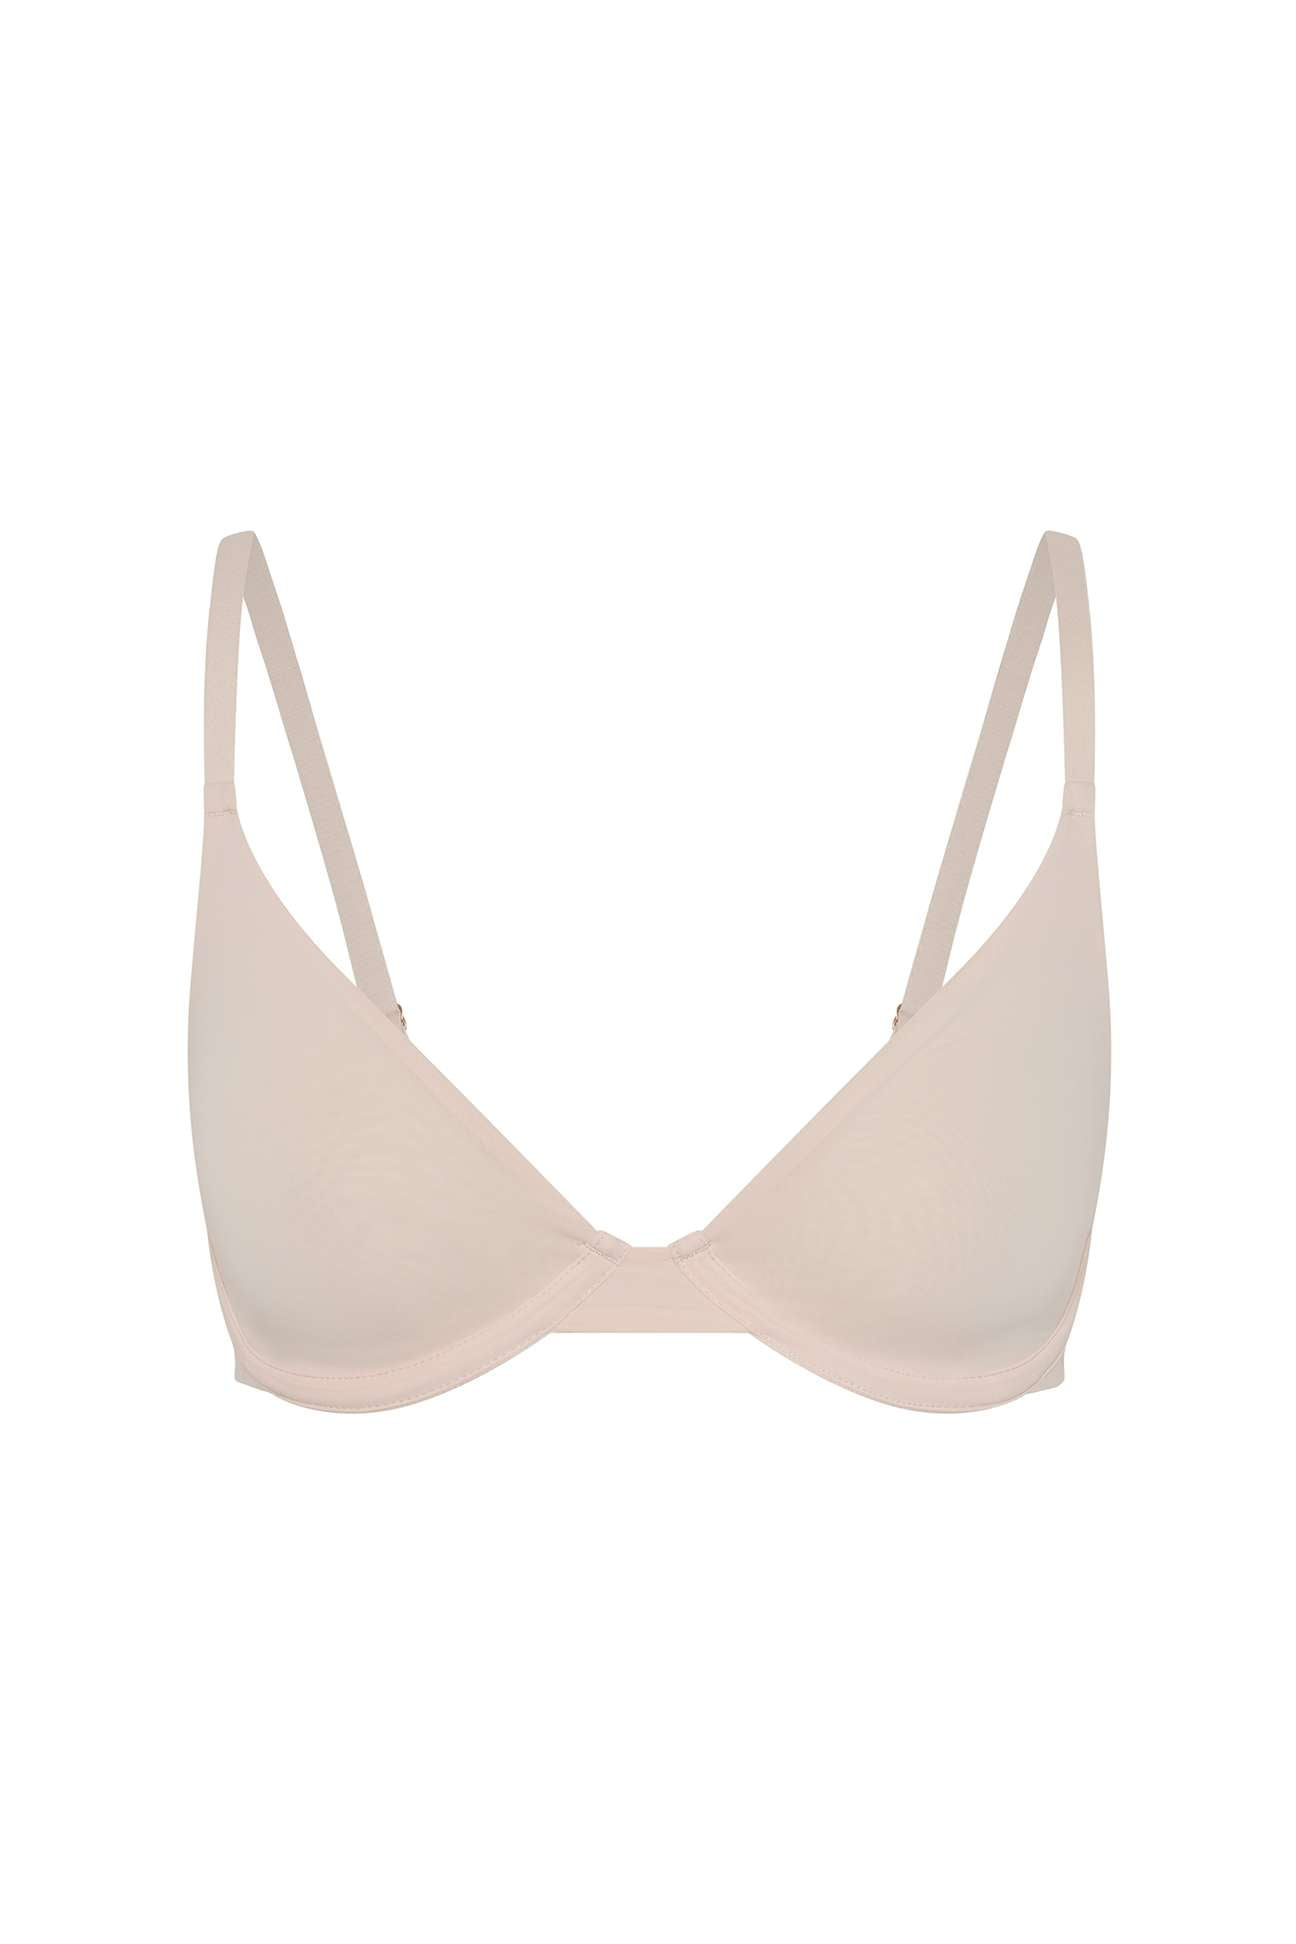 Blush Lingerie Boutique Rugeley - Totally in love with this Bra Set. The  soft Rosedust colour is stunning against your skin. It disappears as well  as any skin tone bra but offers